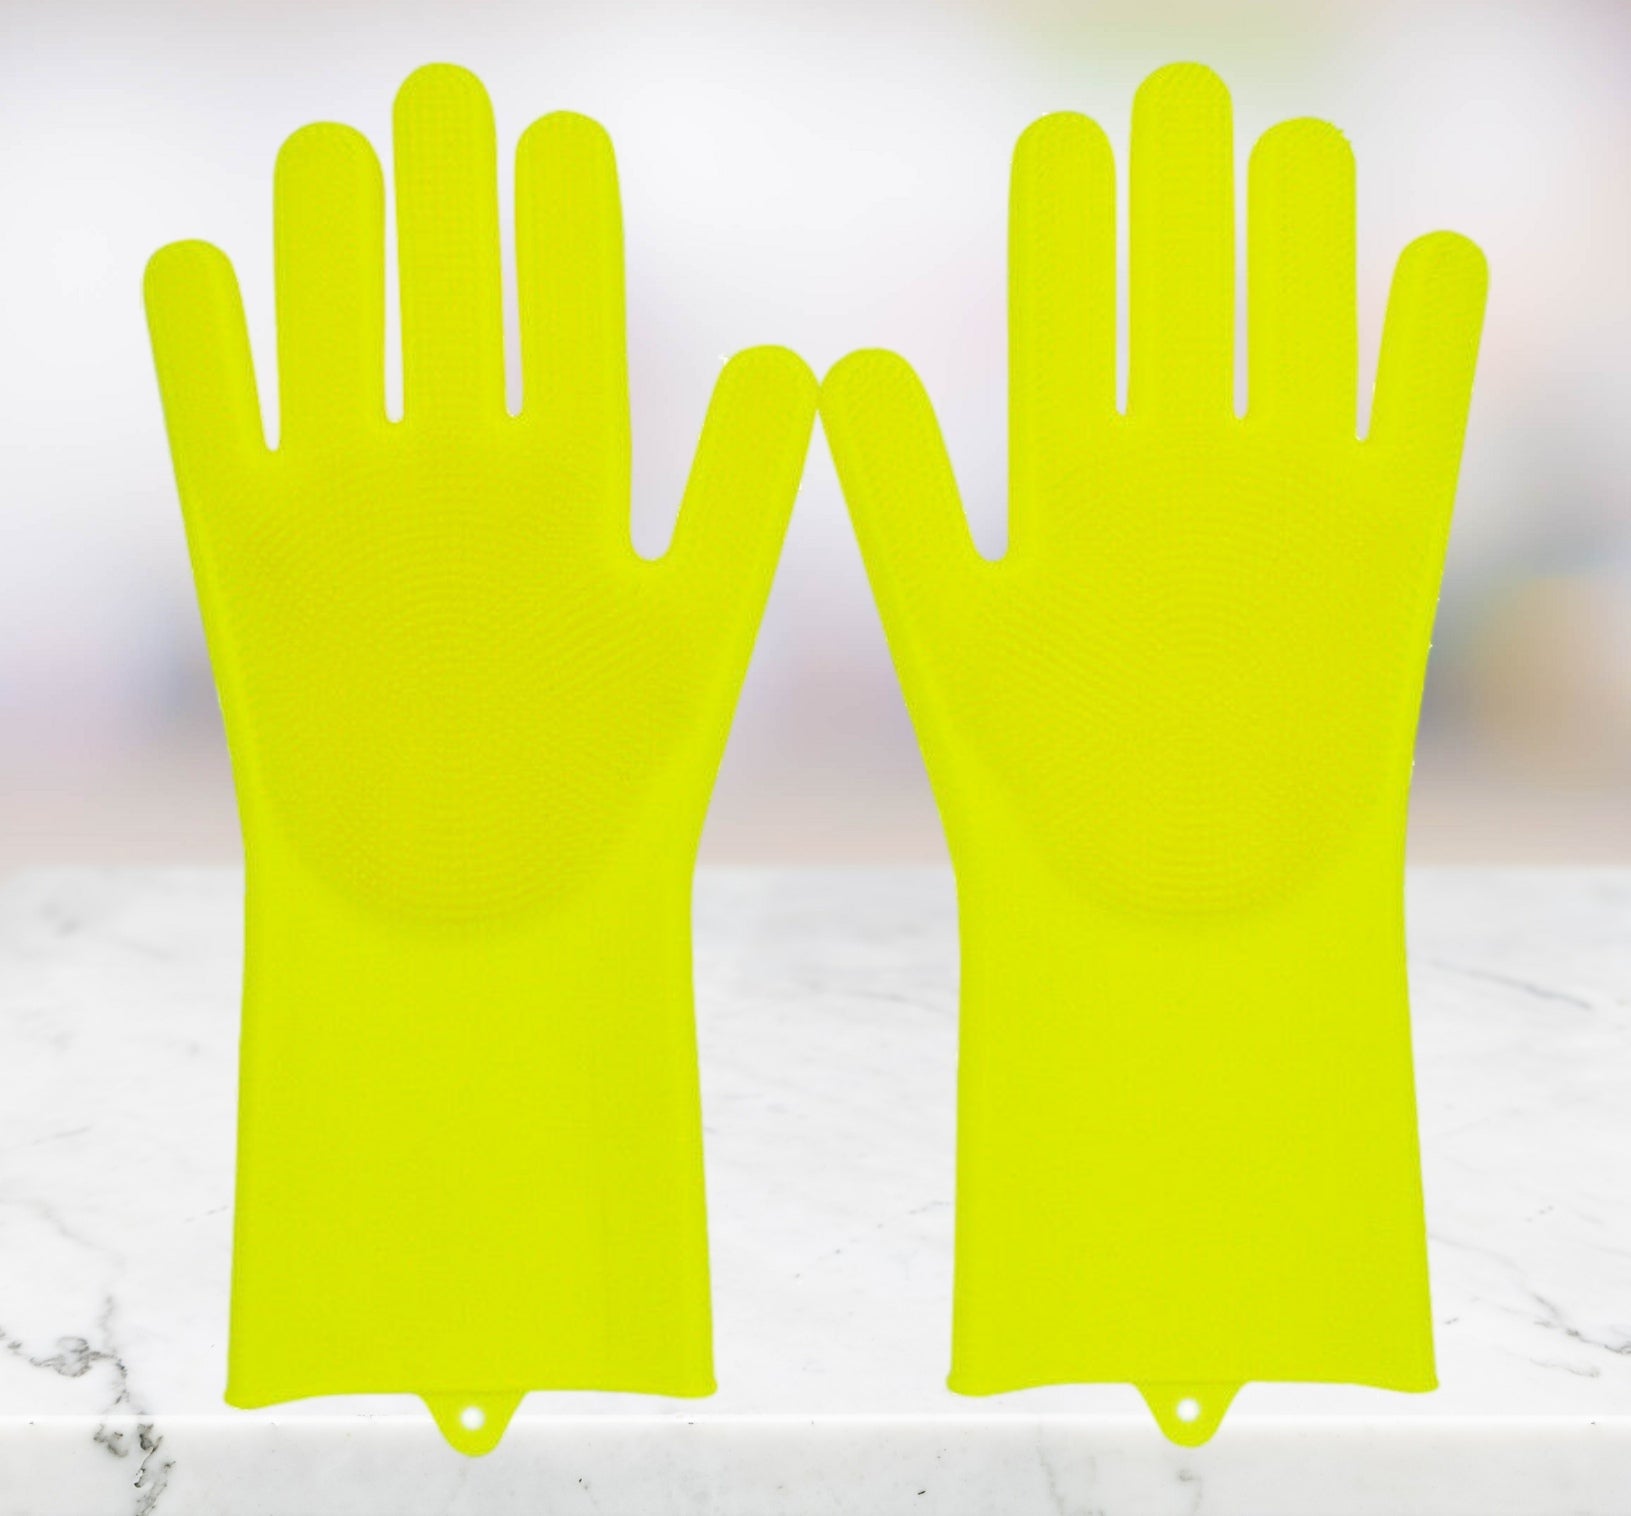 A set of Lime Sunflower's Glove Brush Washing Gloves Silicone kitchen Cleaning Scrubbing Glove with a dog and a dog.